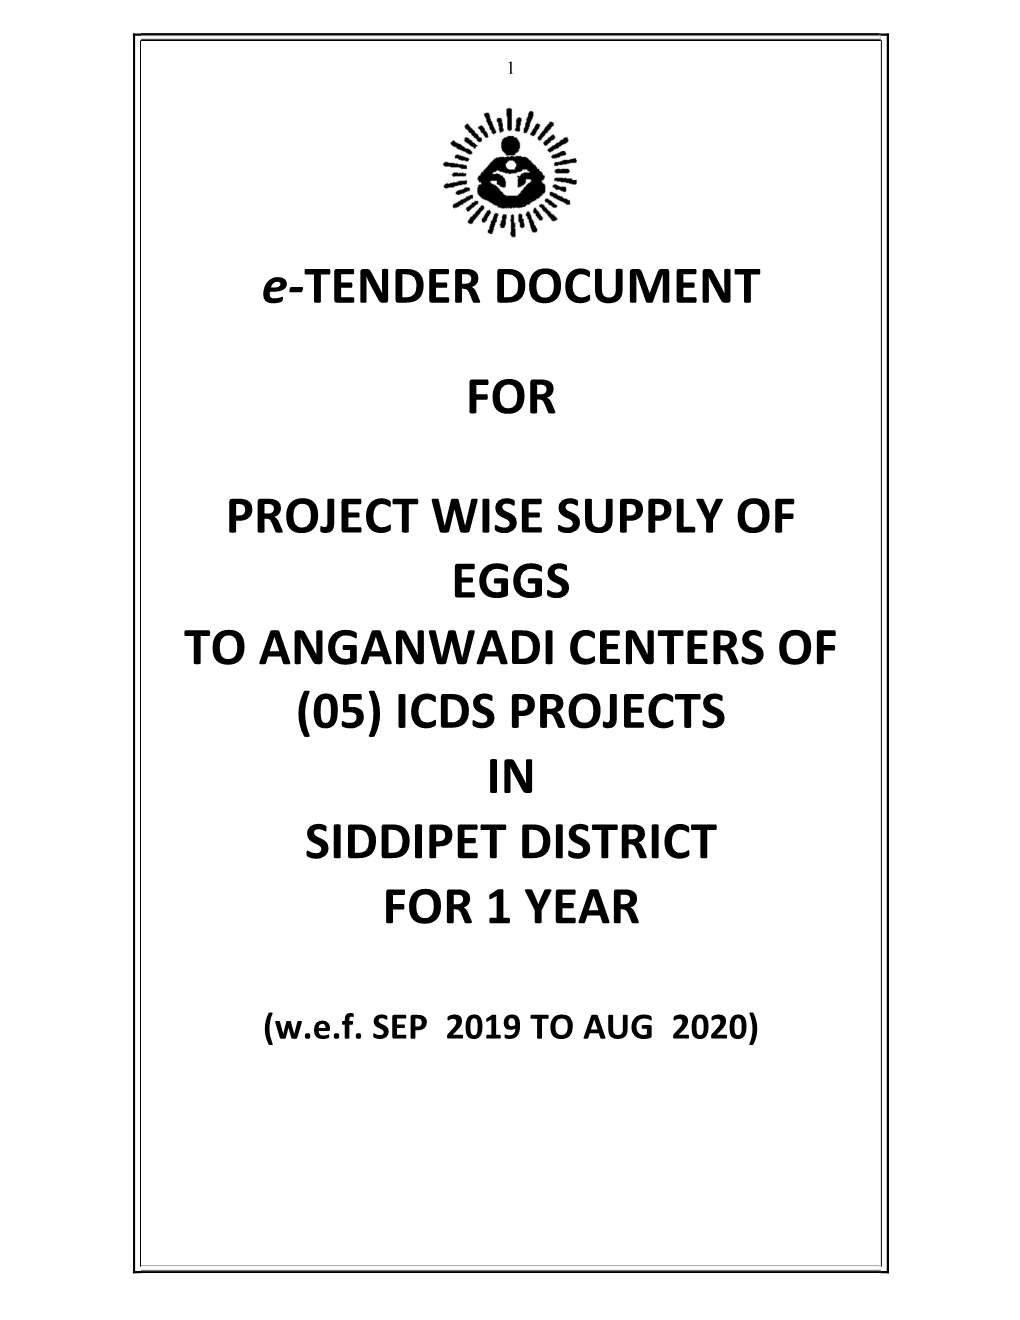 (05) Icds Projects in Siddipet District for 1 Year